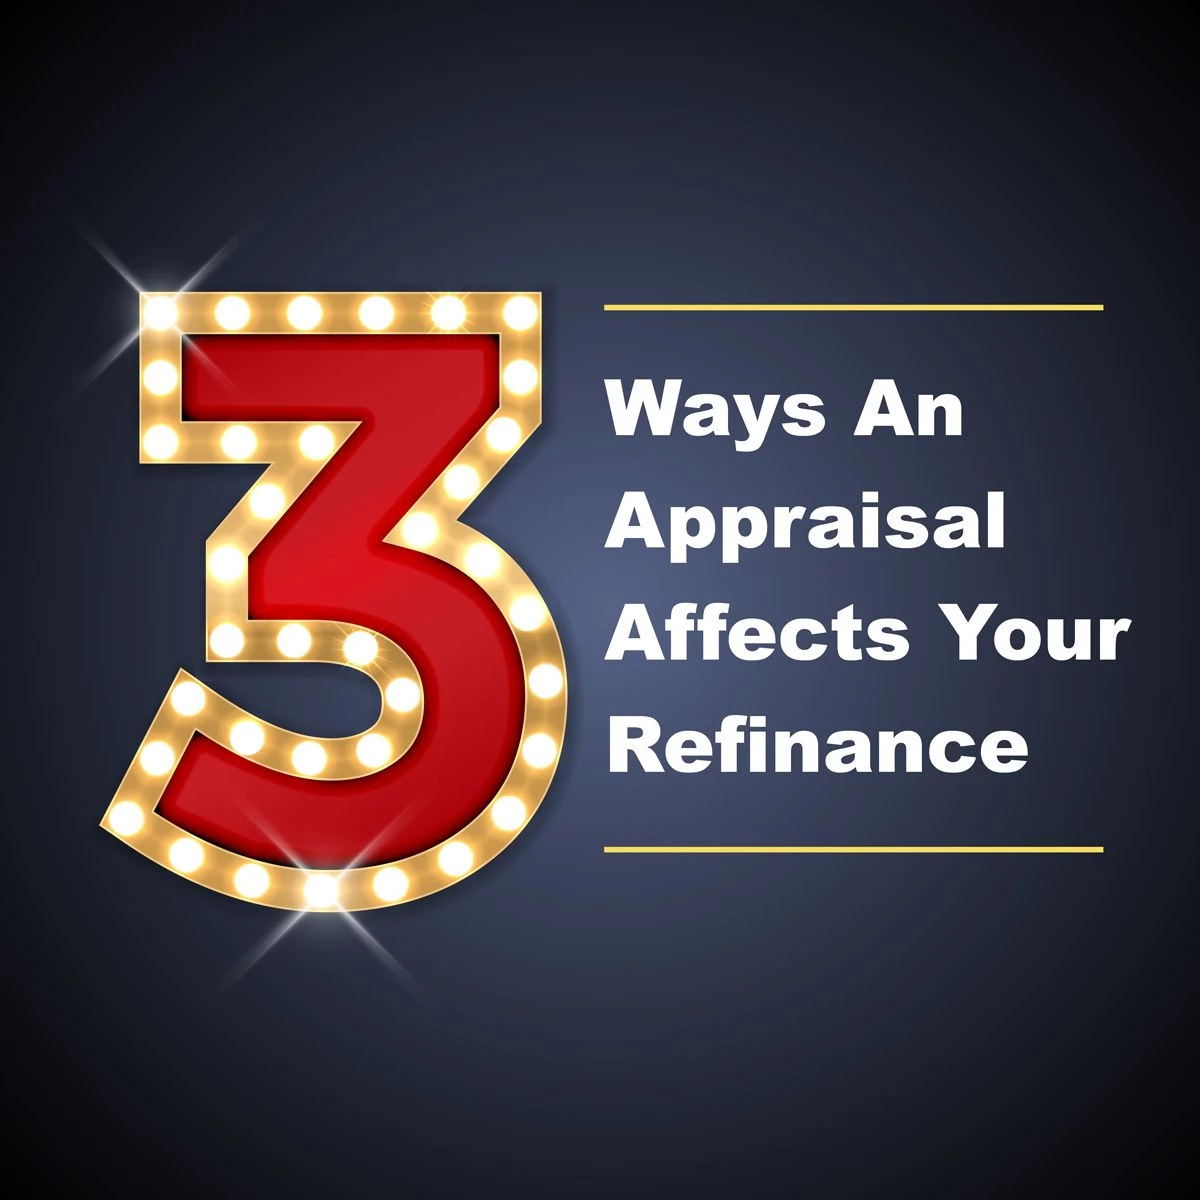 How Does An Appraisal Affect Your Refinance?